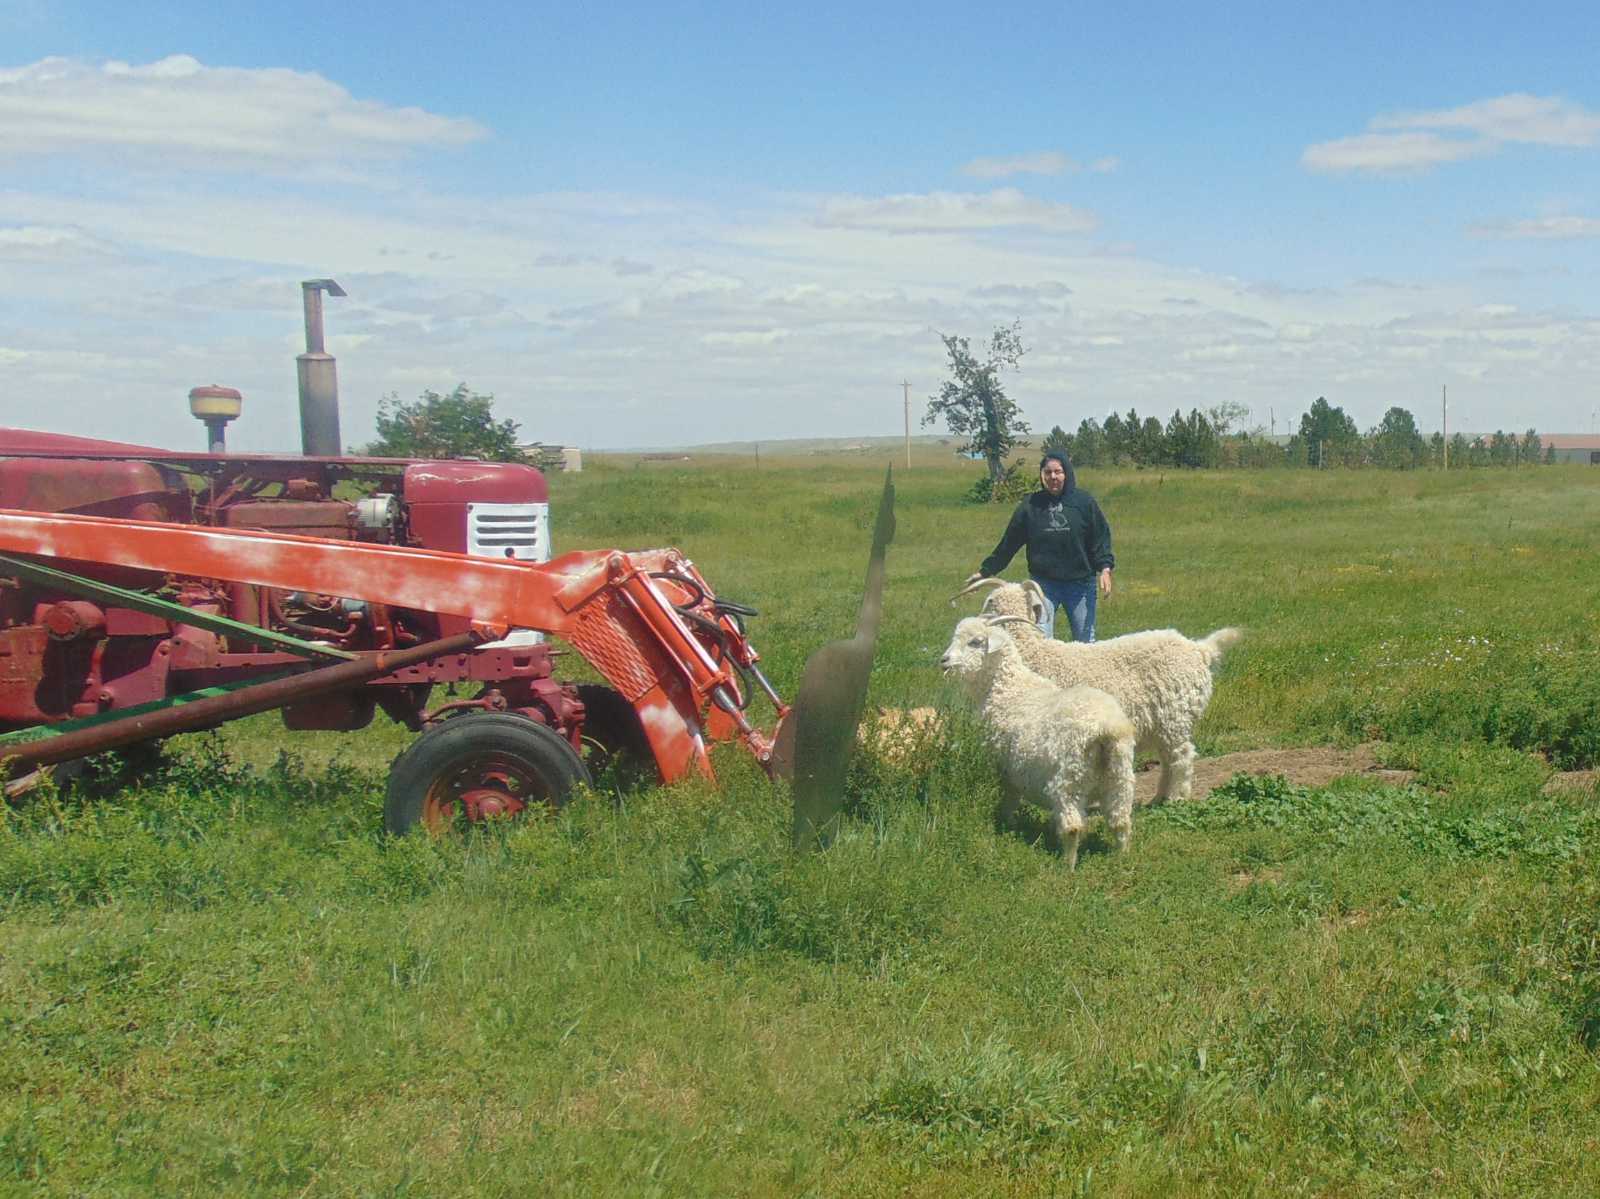 angora goats stand next to tractor